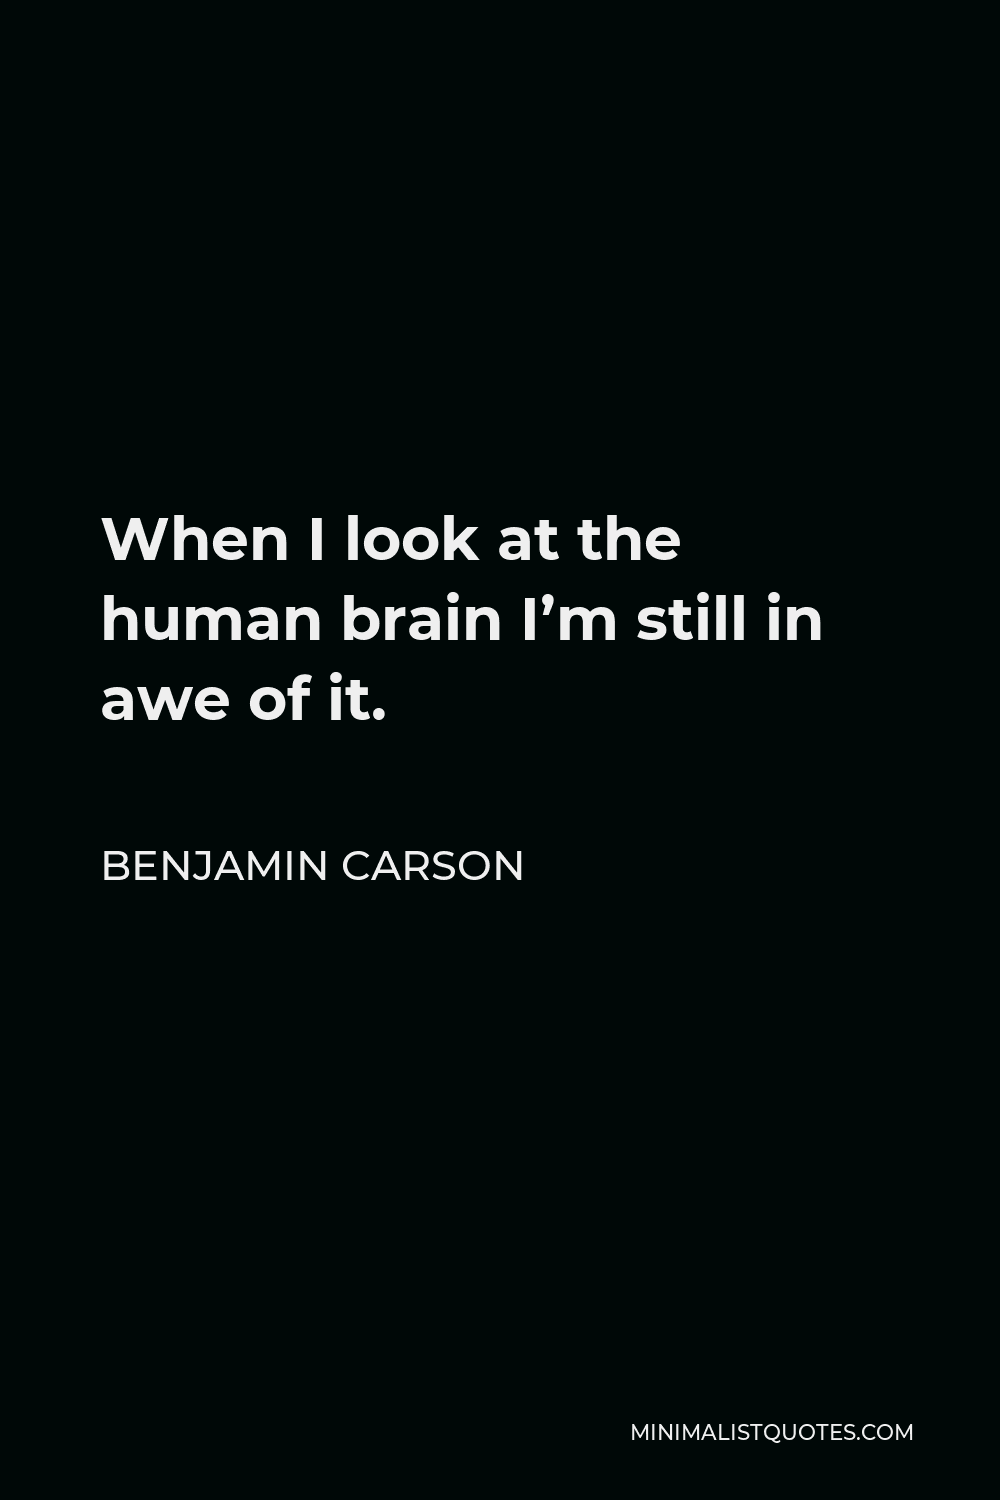 Benjamin Carson Quote - When I look at the human brain I’m still in awe of it.